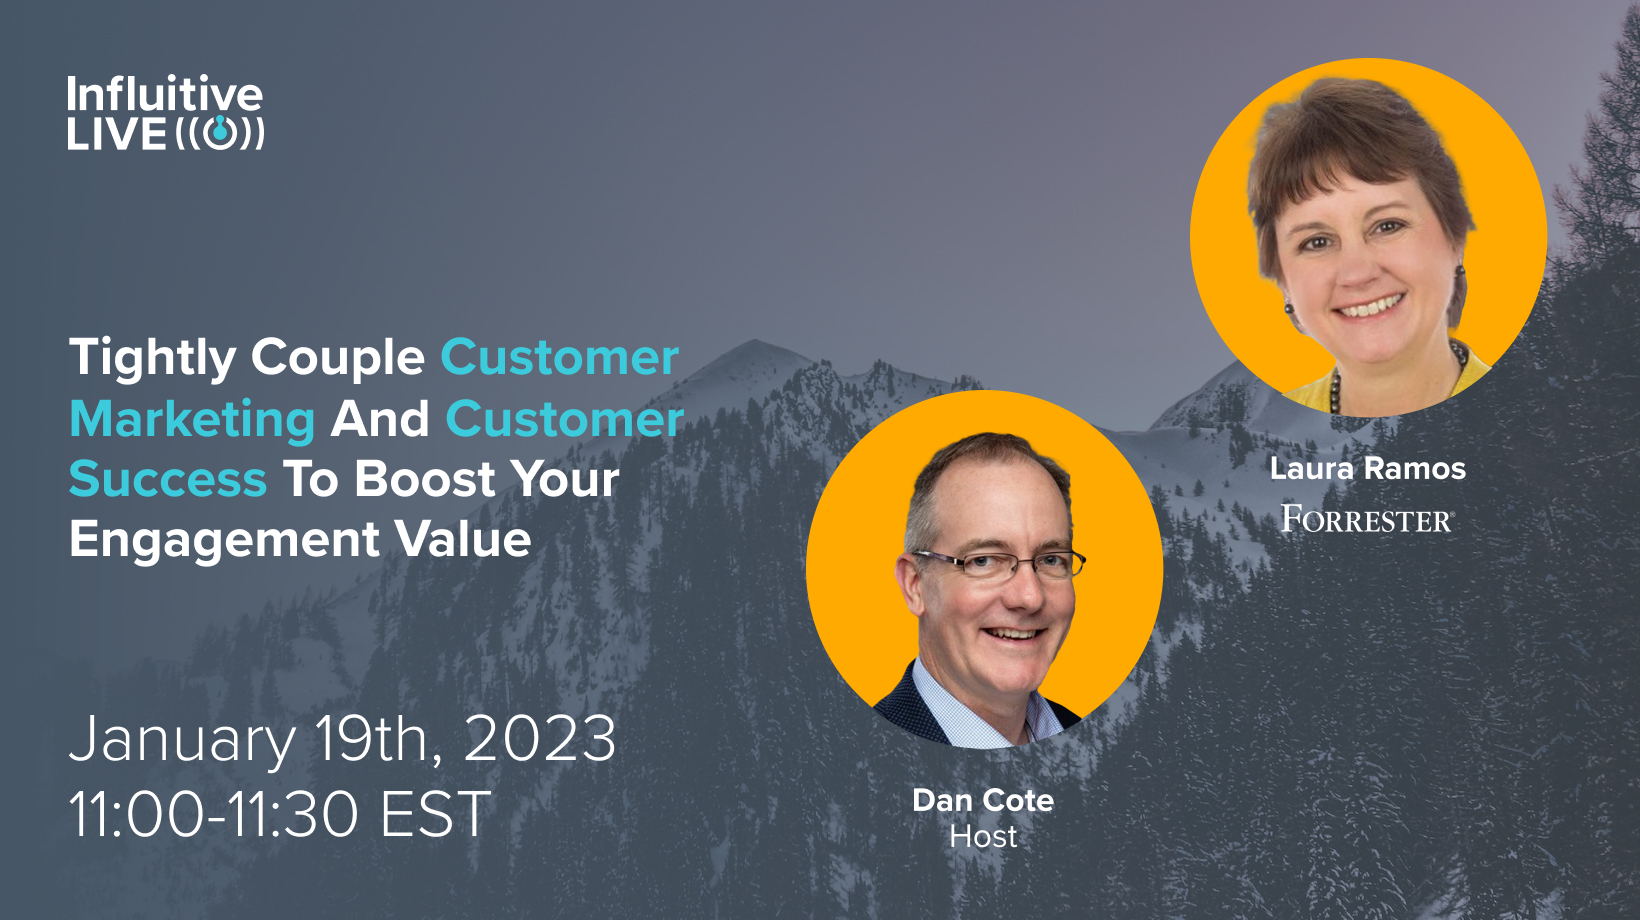 Tightly Couple Customer Marketing and Customer Success to Boost Your Engagement Value – Laura Ramos (Forrester)